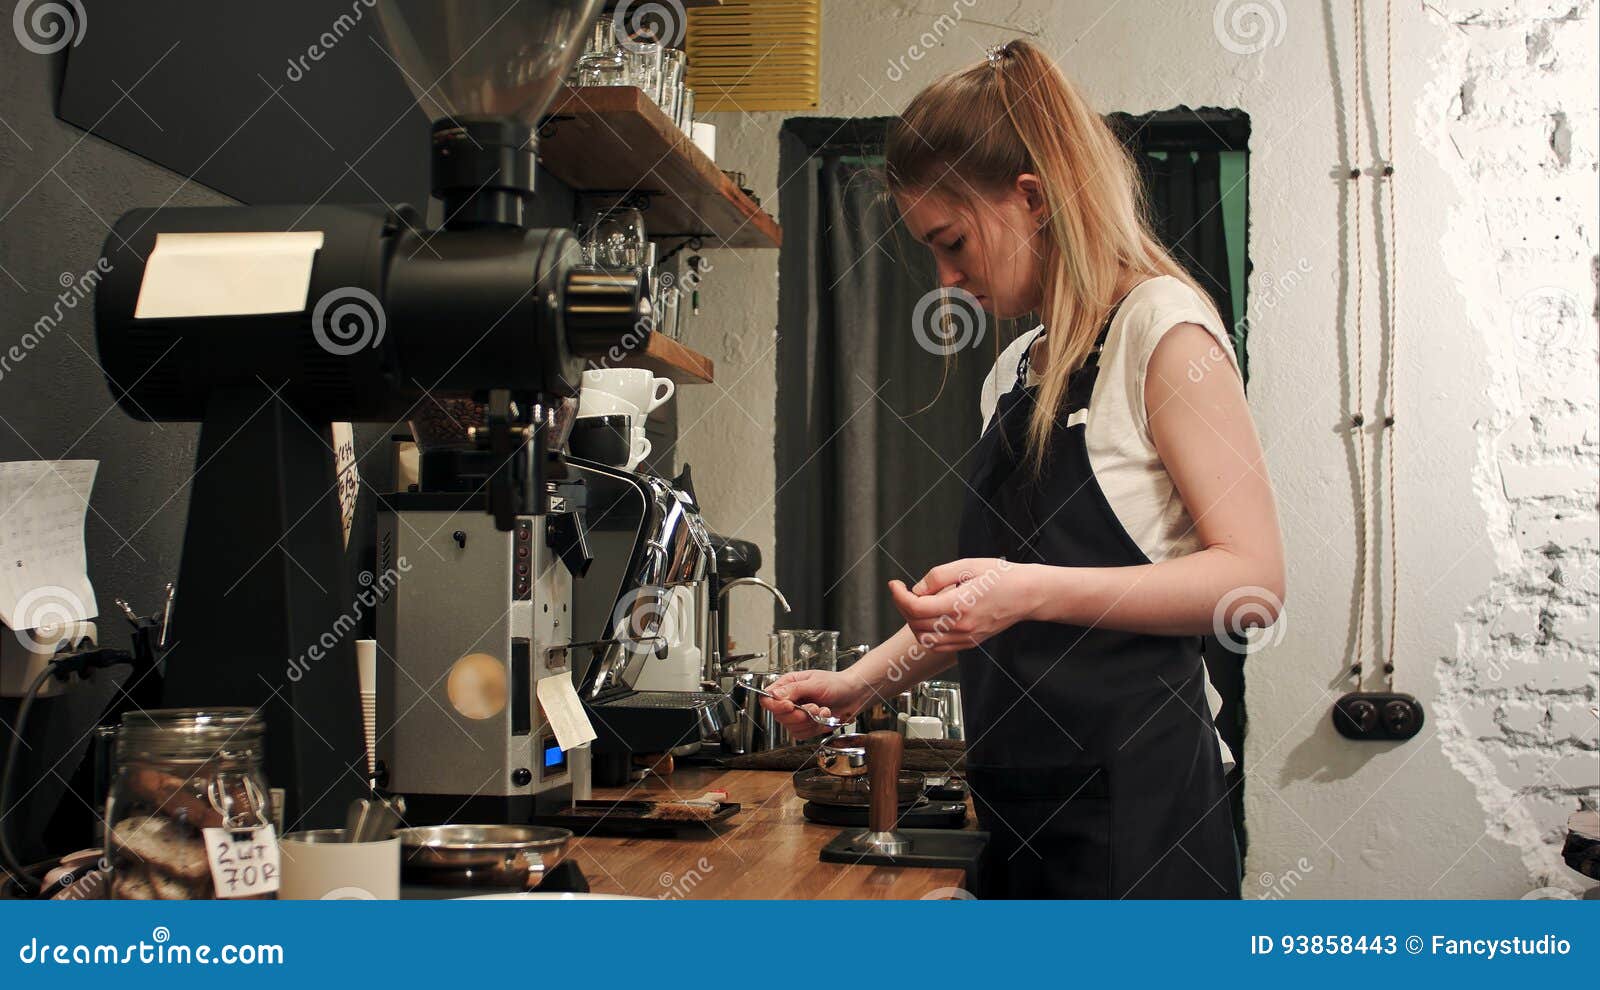 https://thumbs.dreamstime.com/z/pretty-young-female-barista-weighing-coffee-grains-scale-brewing-cup-coffee-professional-shot-k-resolution-you-93858443.jpg